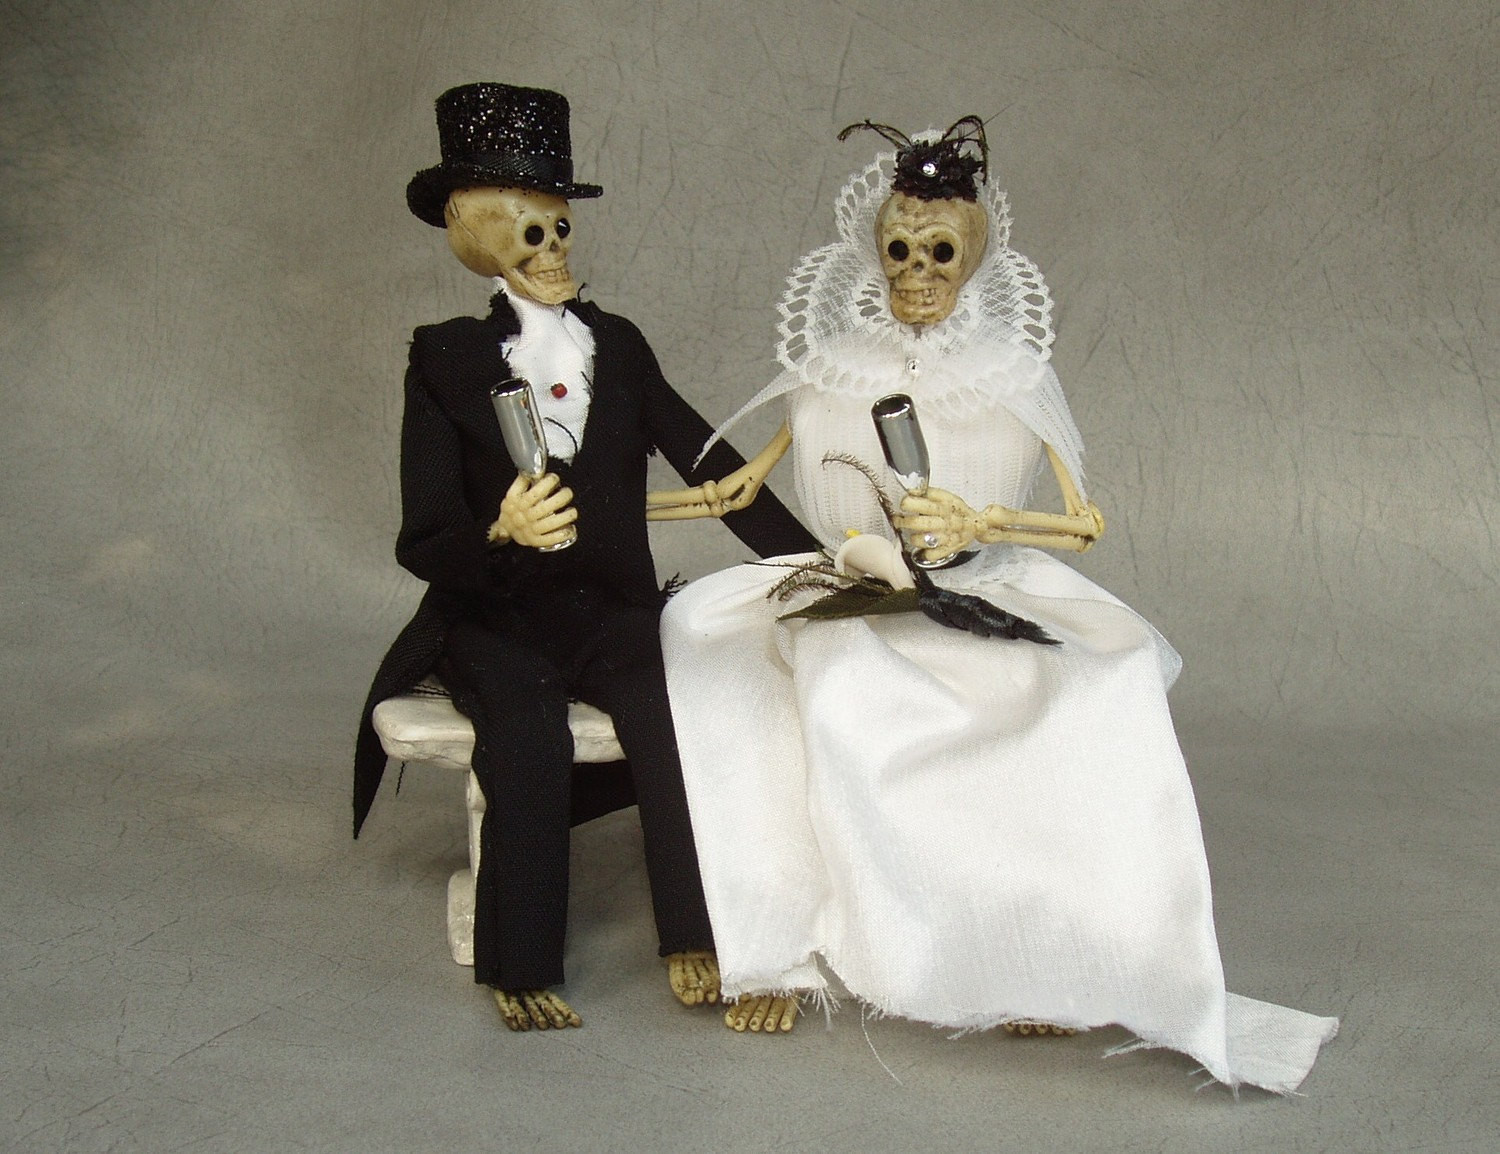 Skeleton Wedding Cake Toppers
 Skeleton Bride and Groom Wedding Cake Topper by by